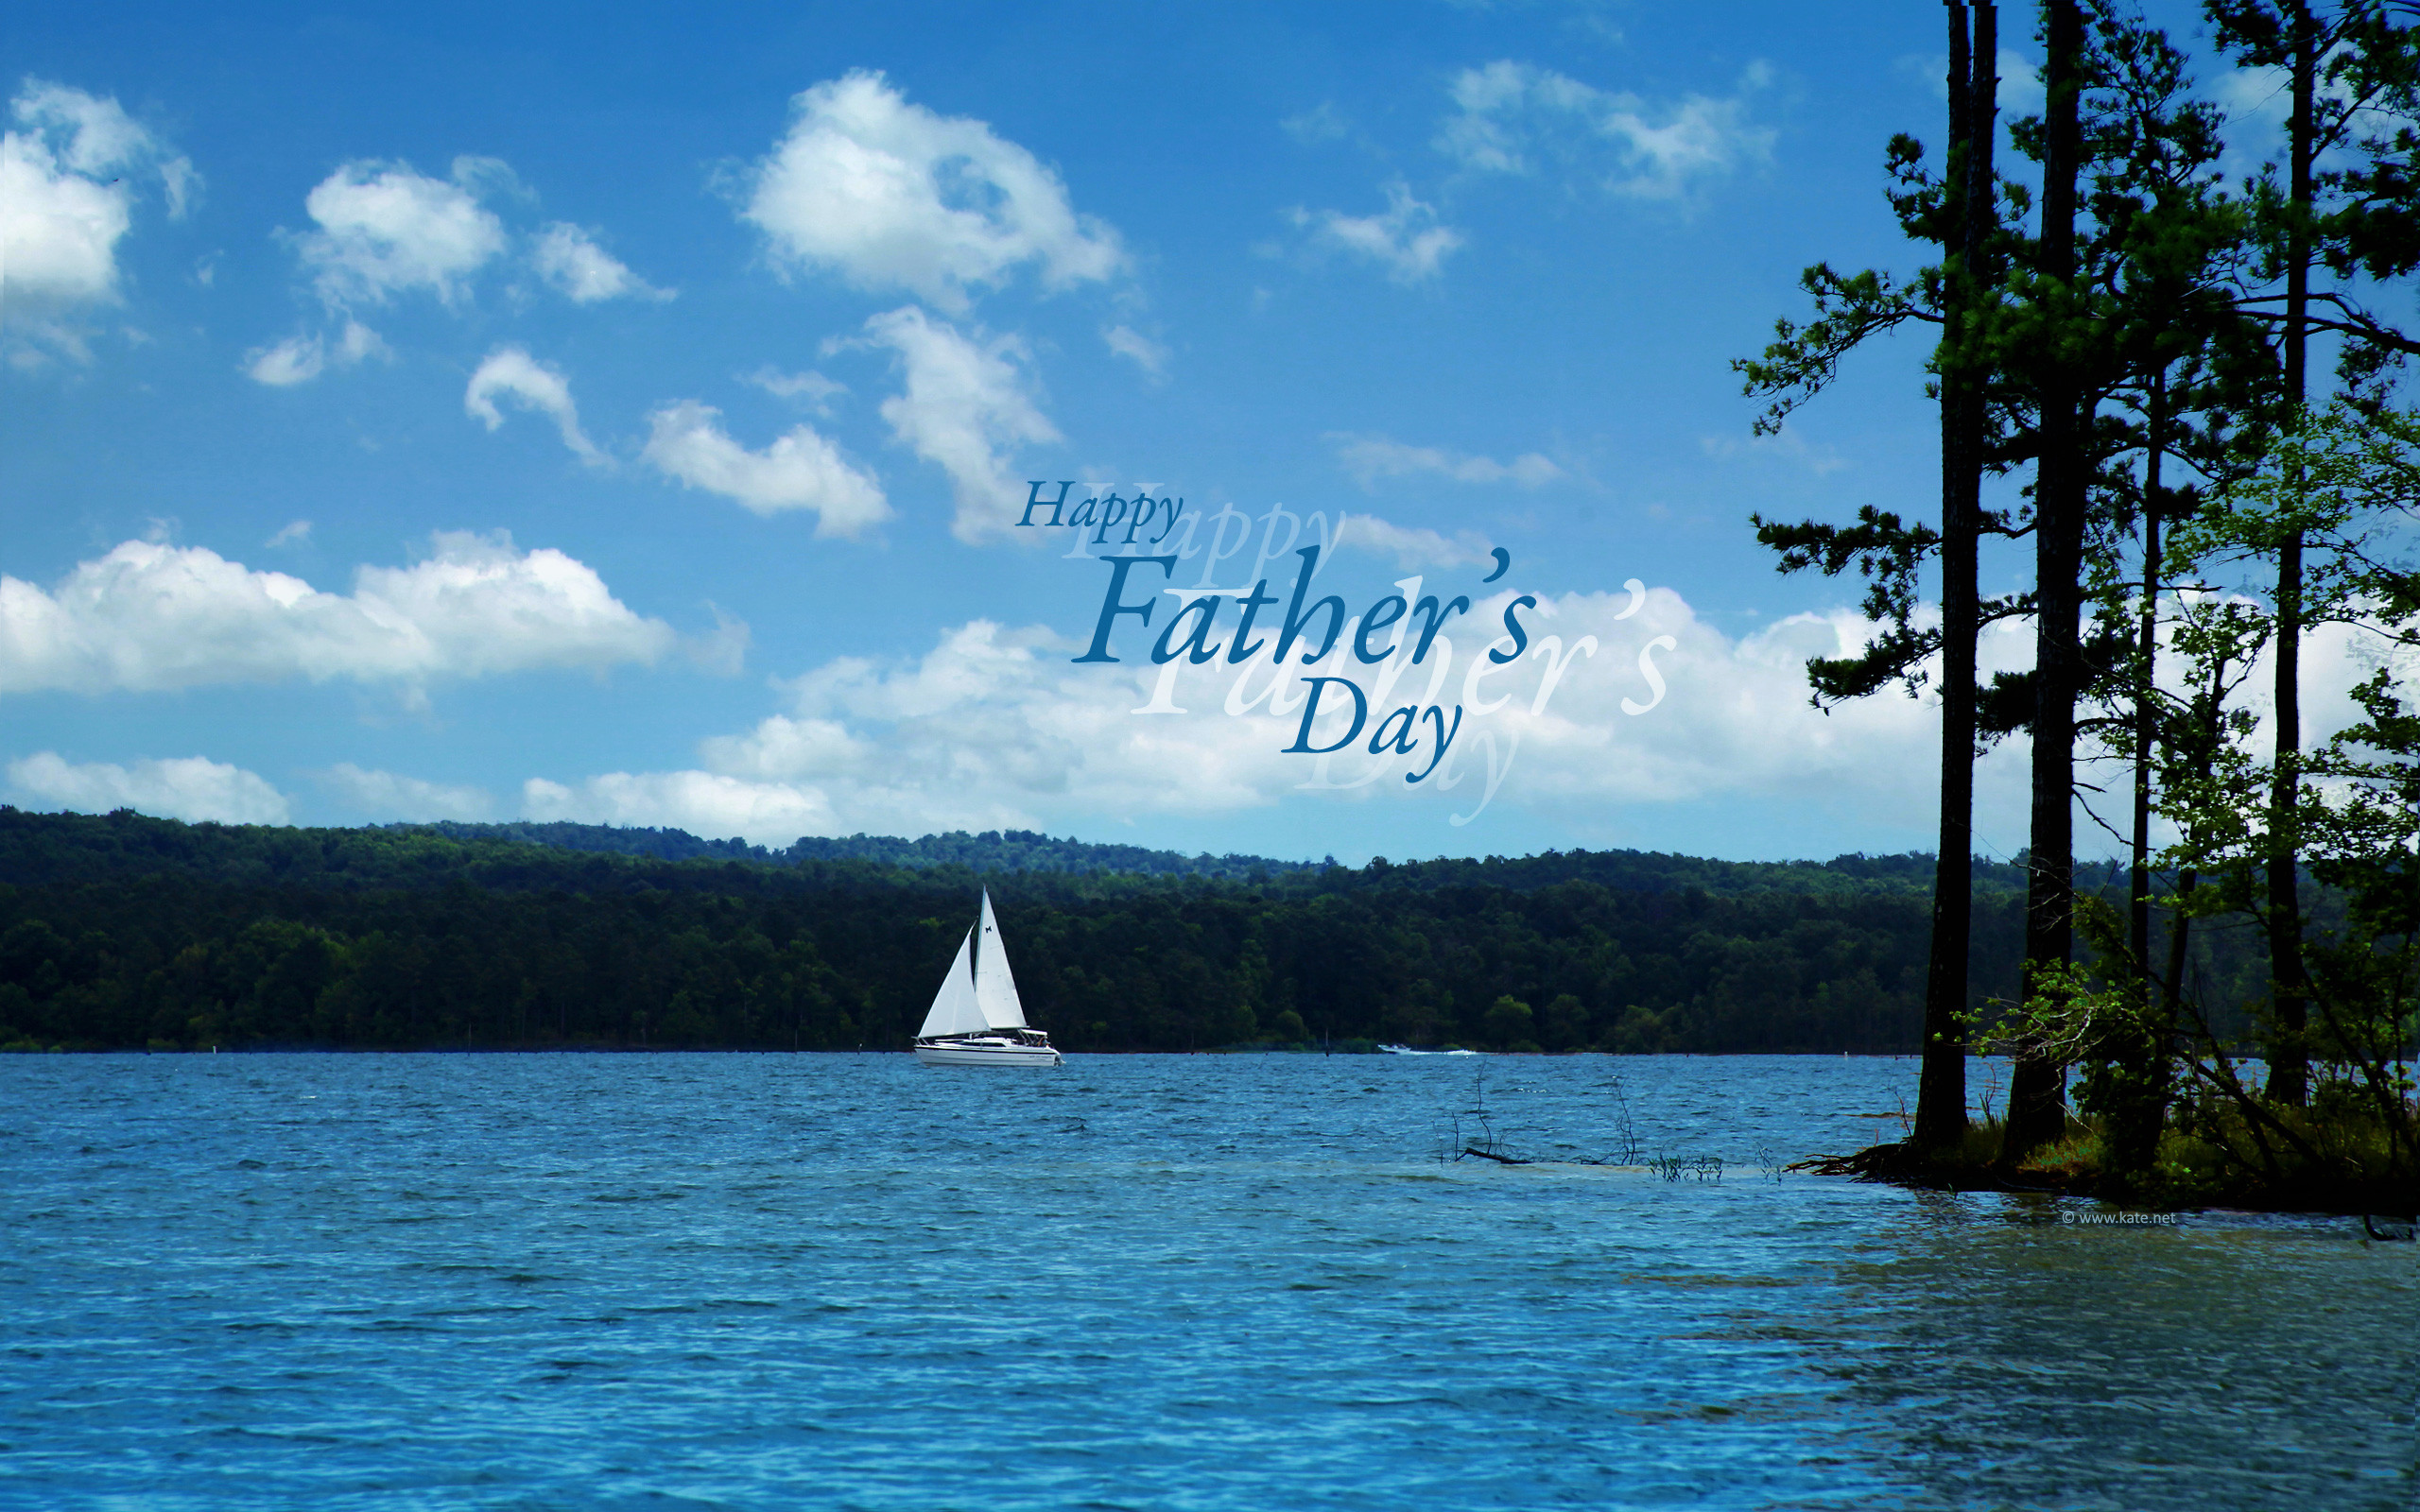 2560x1600 June 15 Father's Day sailboat